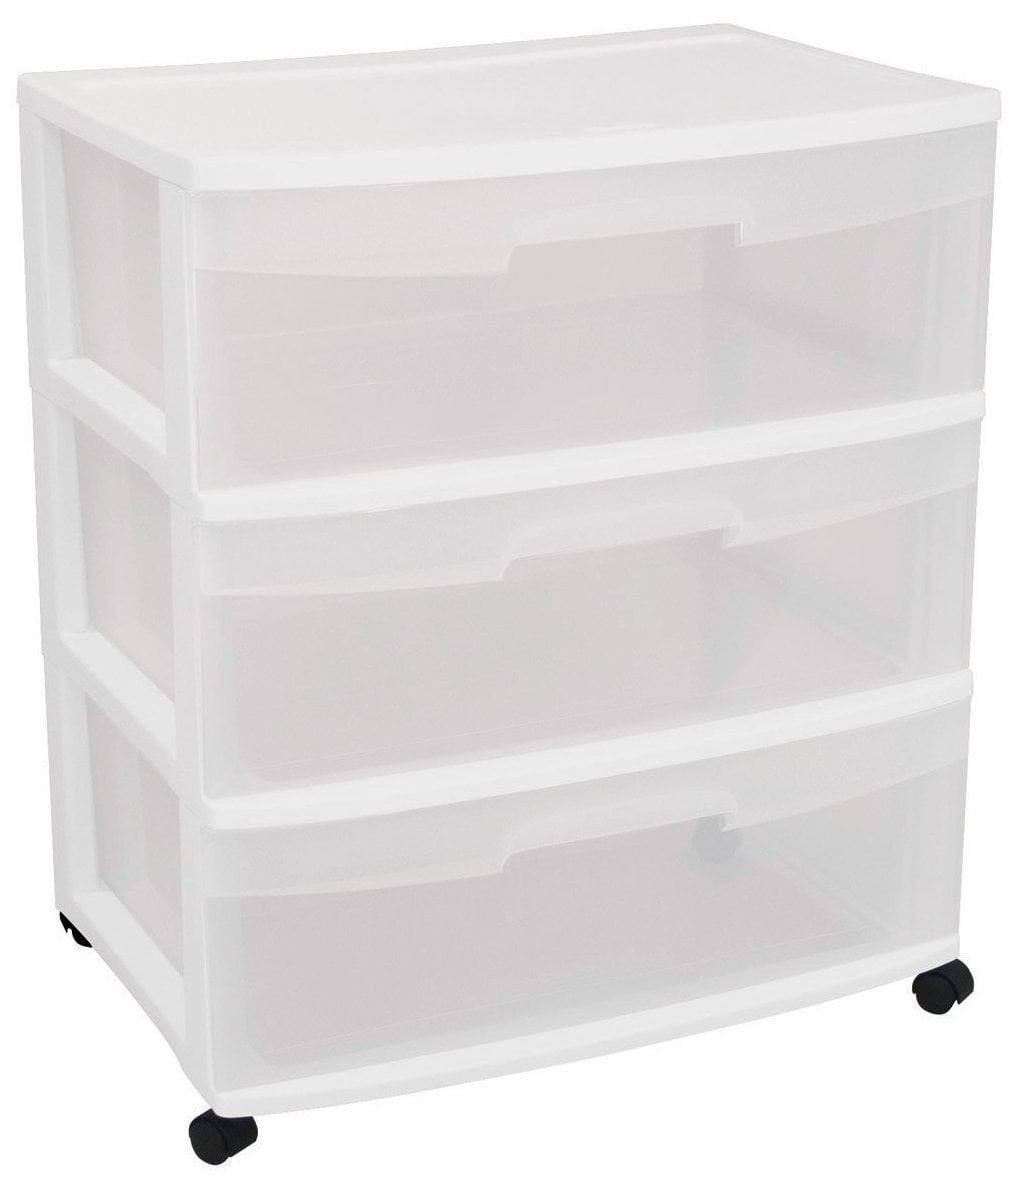 White Frame with Clear Drawers and Black Casters Sterilite 29308001 Wide 3 Drawer Cart 